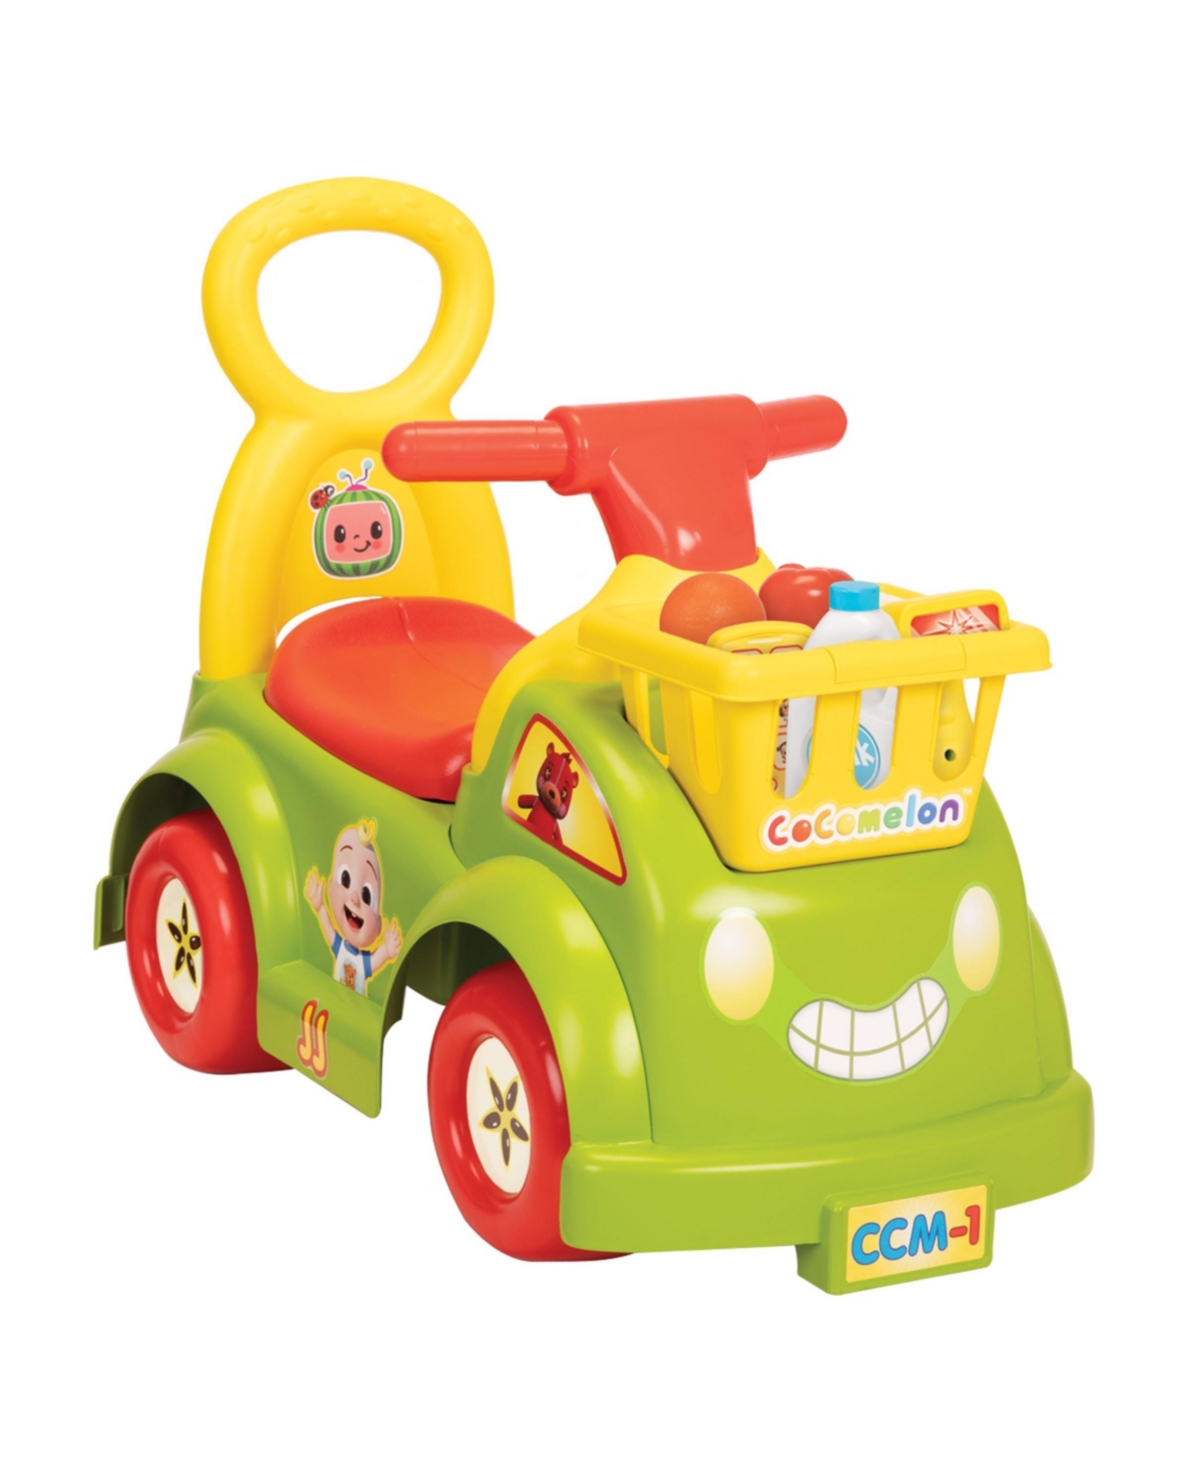 Cocomelon Healthy Habits Kids' Ride-on With Sound, Songs, Lights And Bonus Toys In No Color